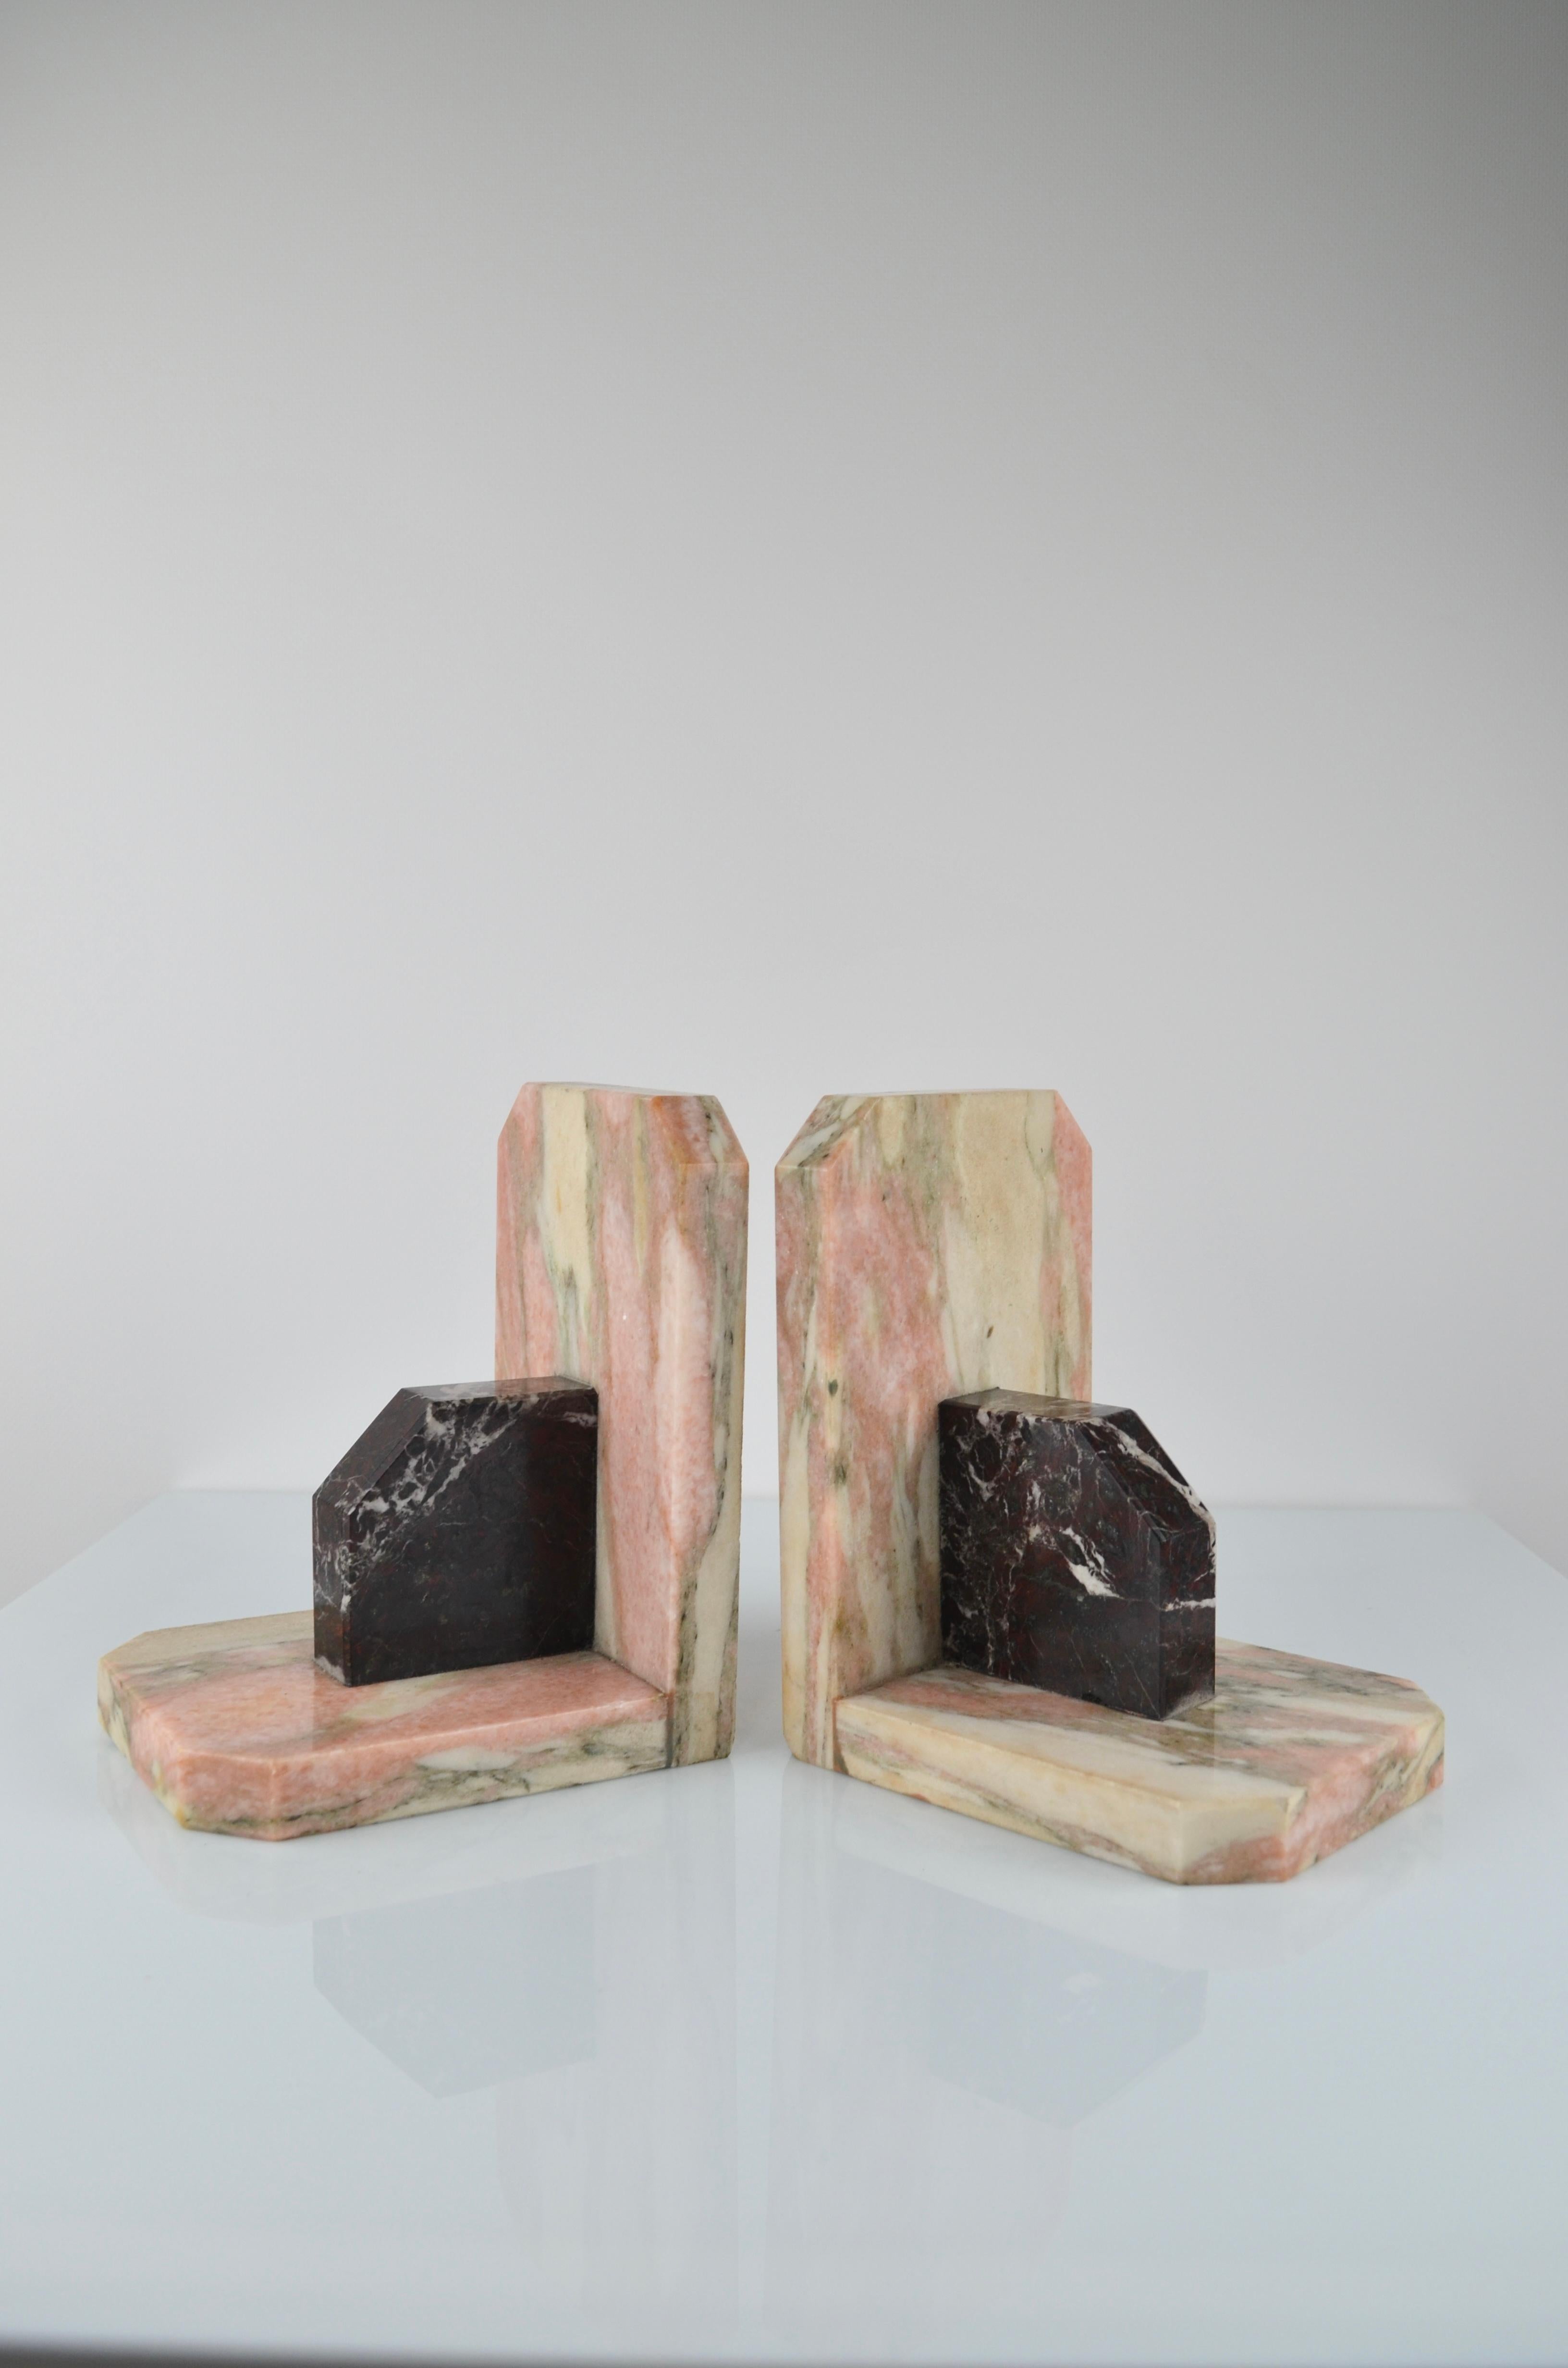 Magnificent pair of french bookends art deco period.
Stylized shape and composed of 2 different marbles.